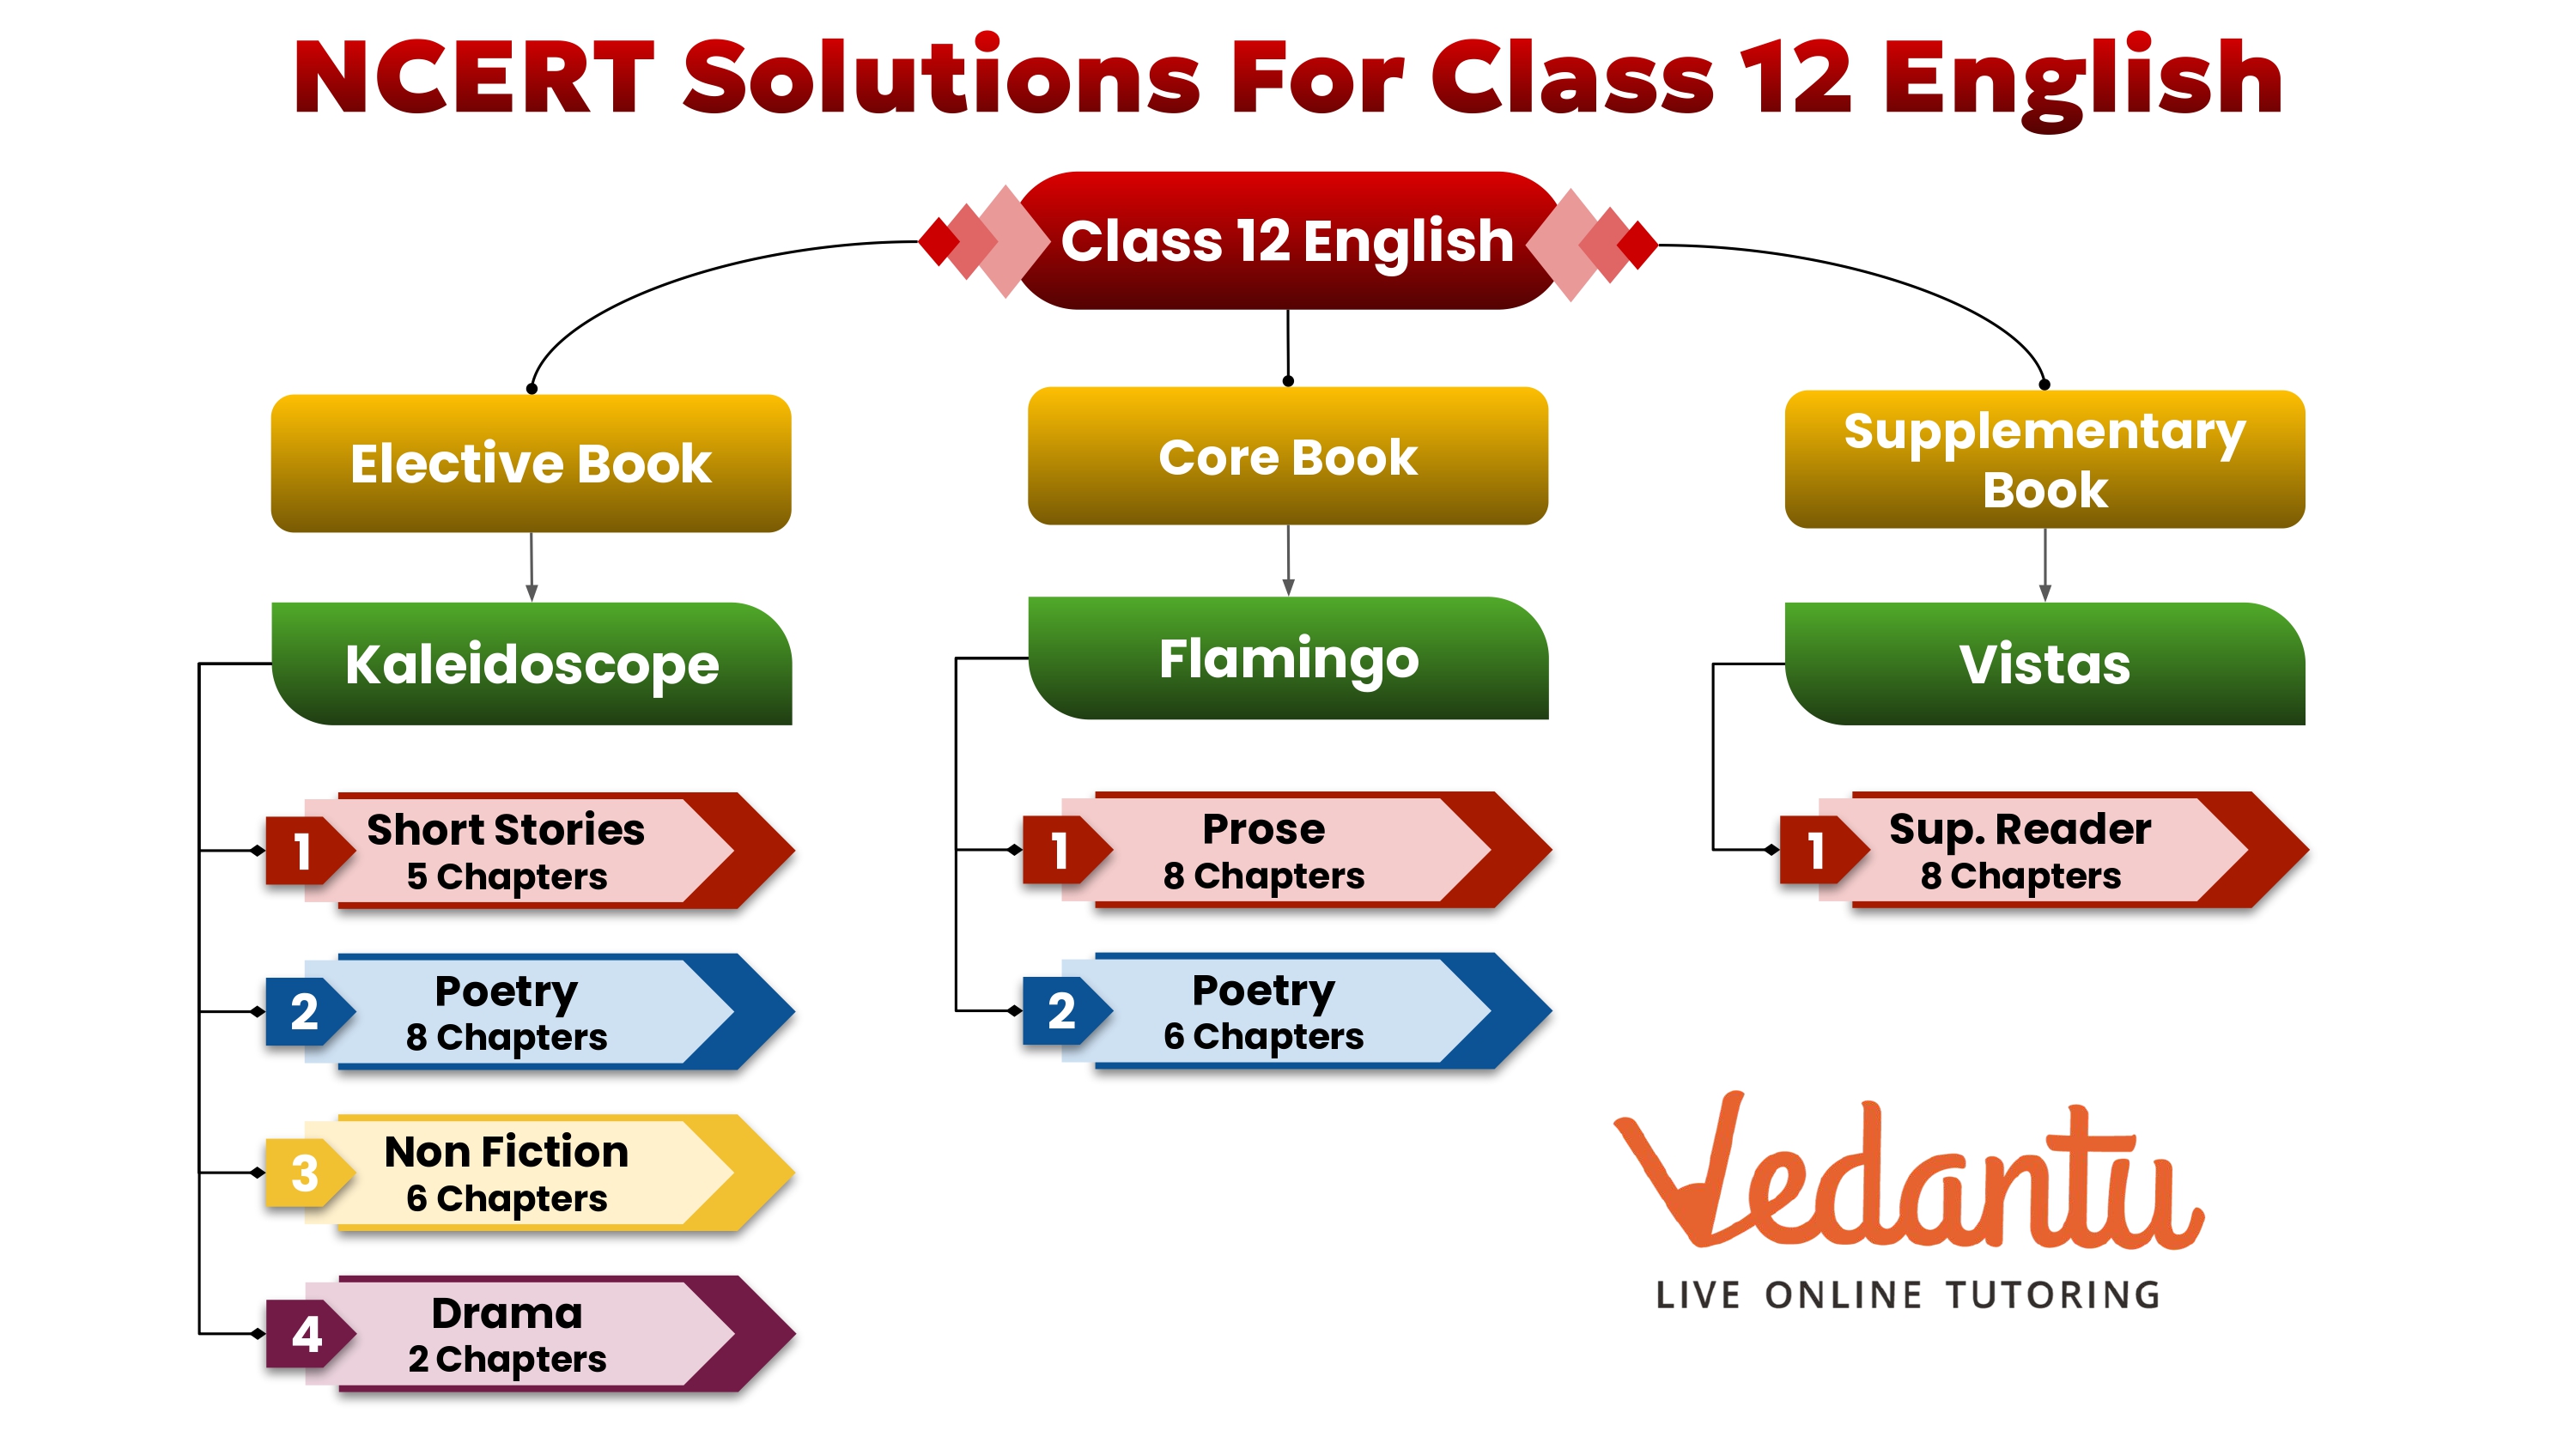 NCERT Solutions For class 12 English Chapter-wise List